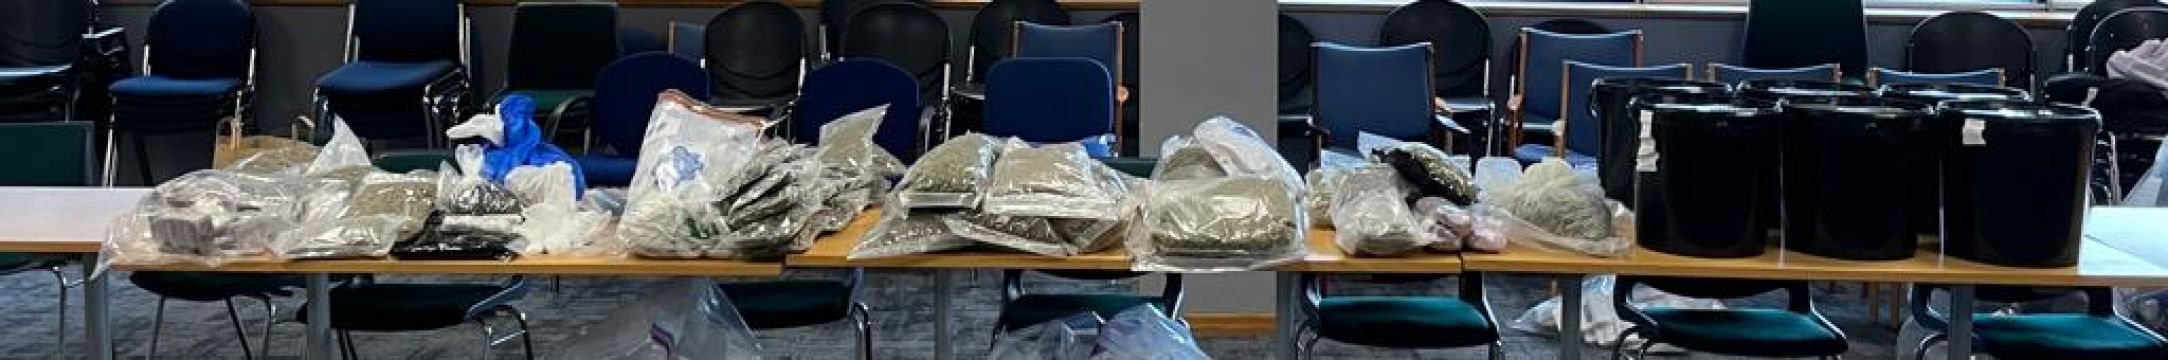 Gardaí Seize Drugs And Vehicles Worth €681,000